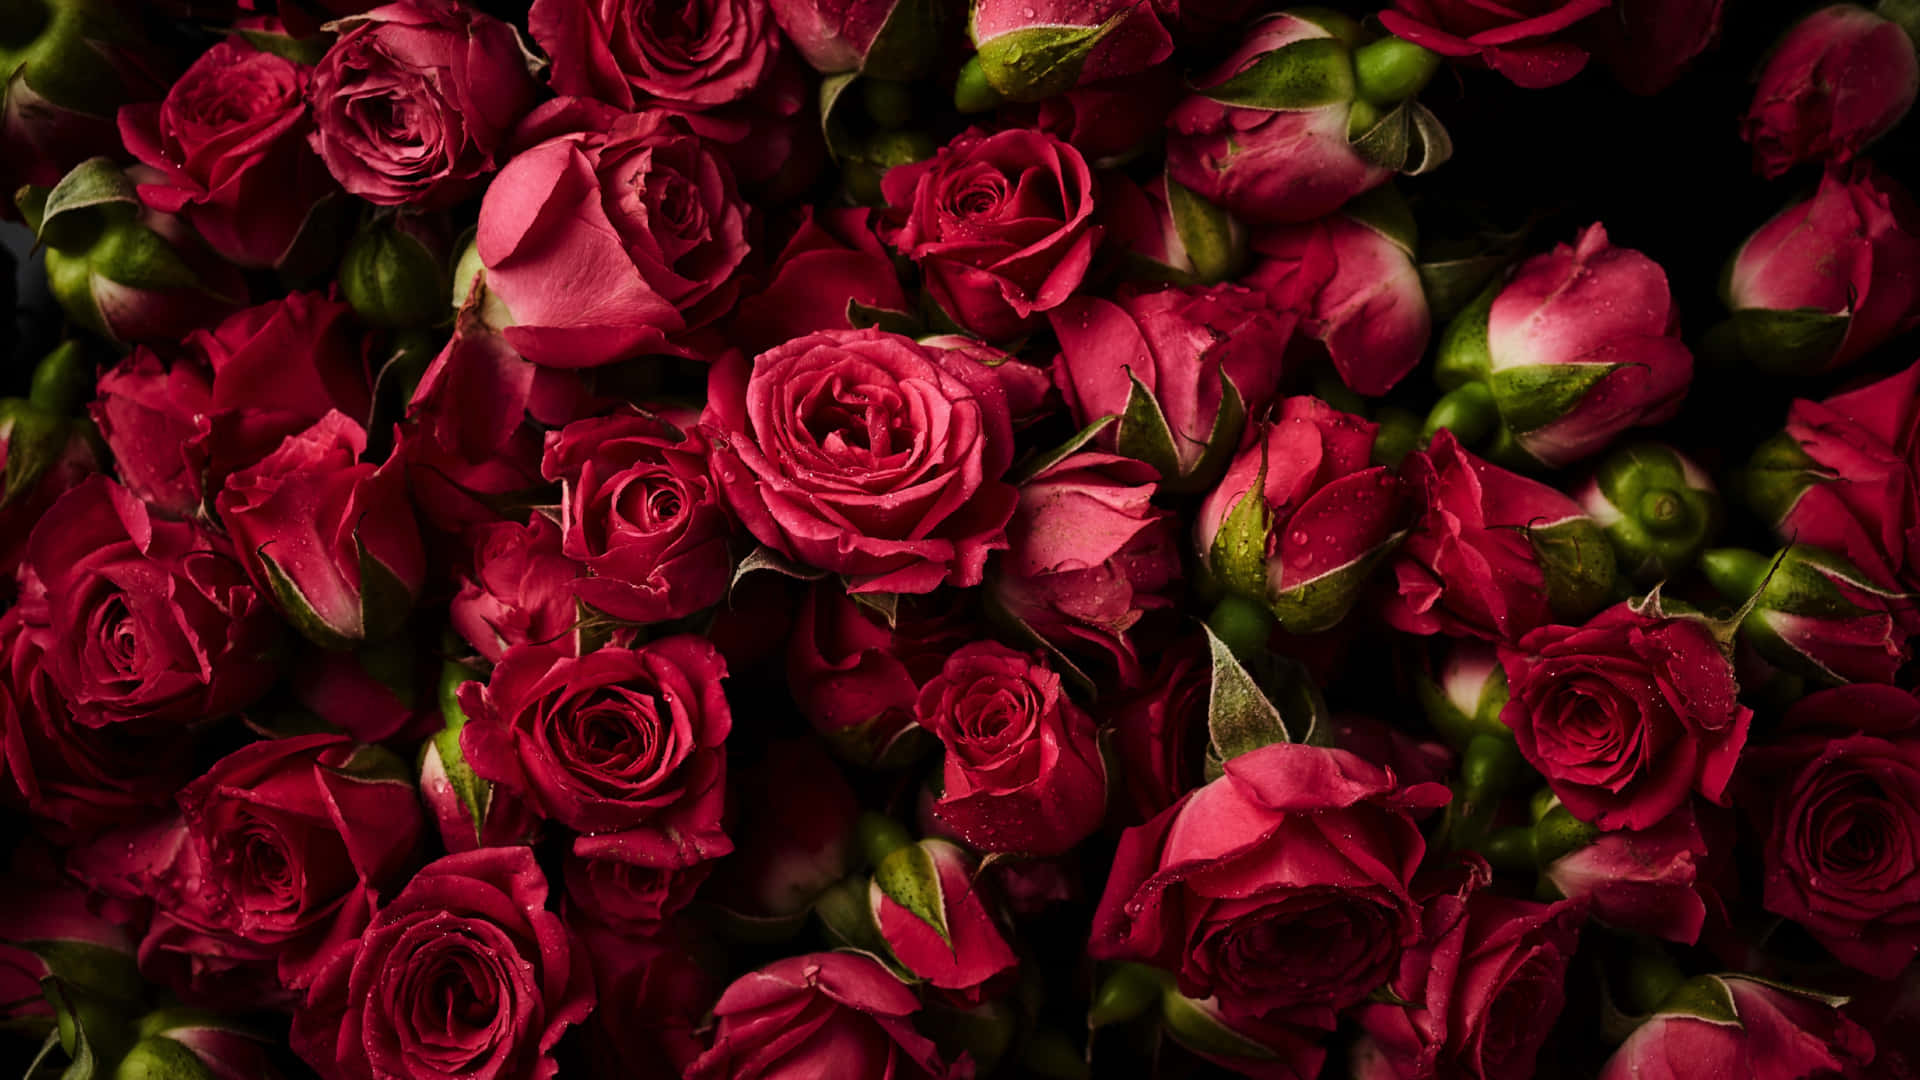 1440p Top View Shot Roses Background